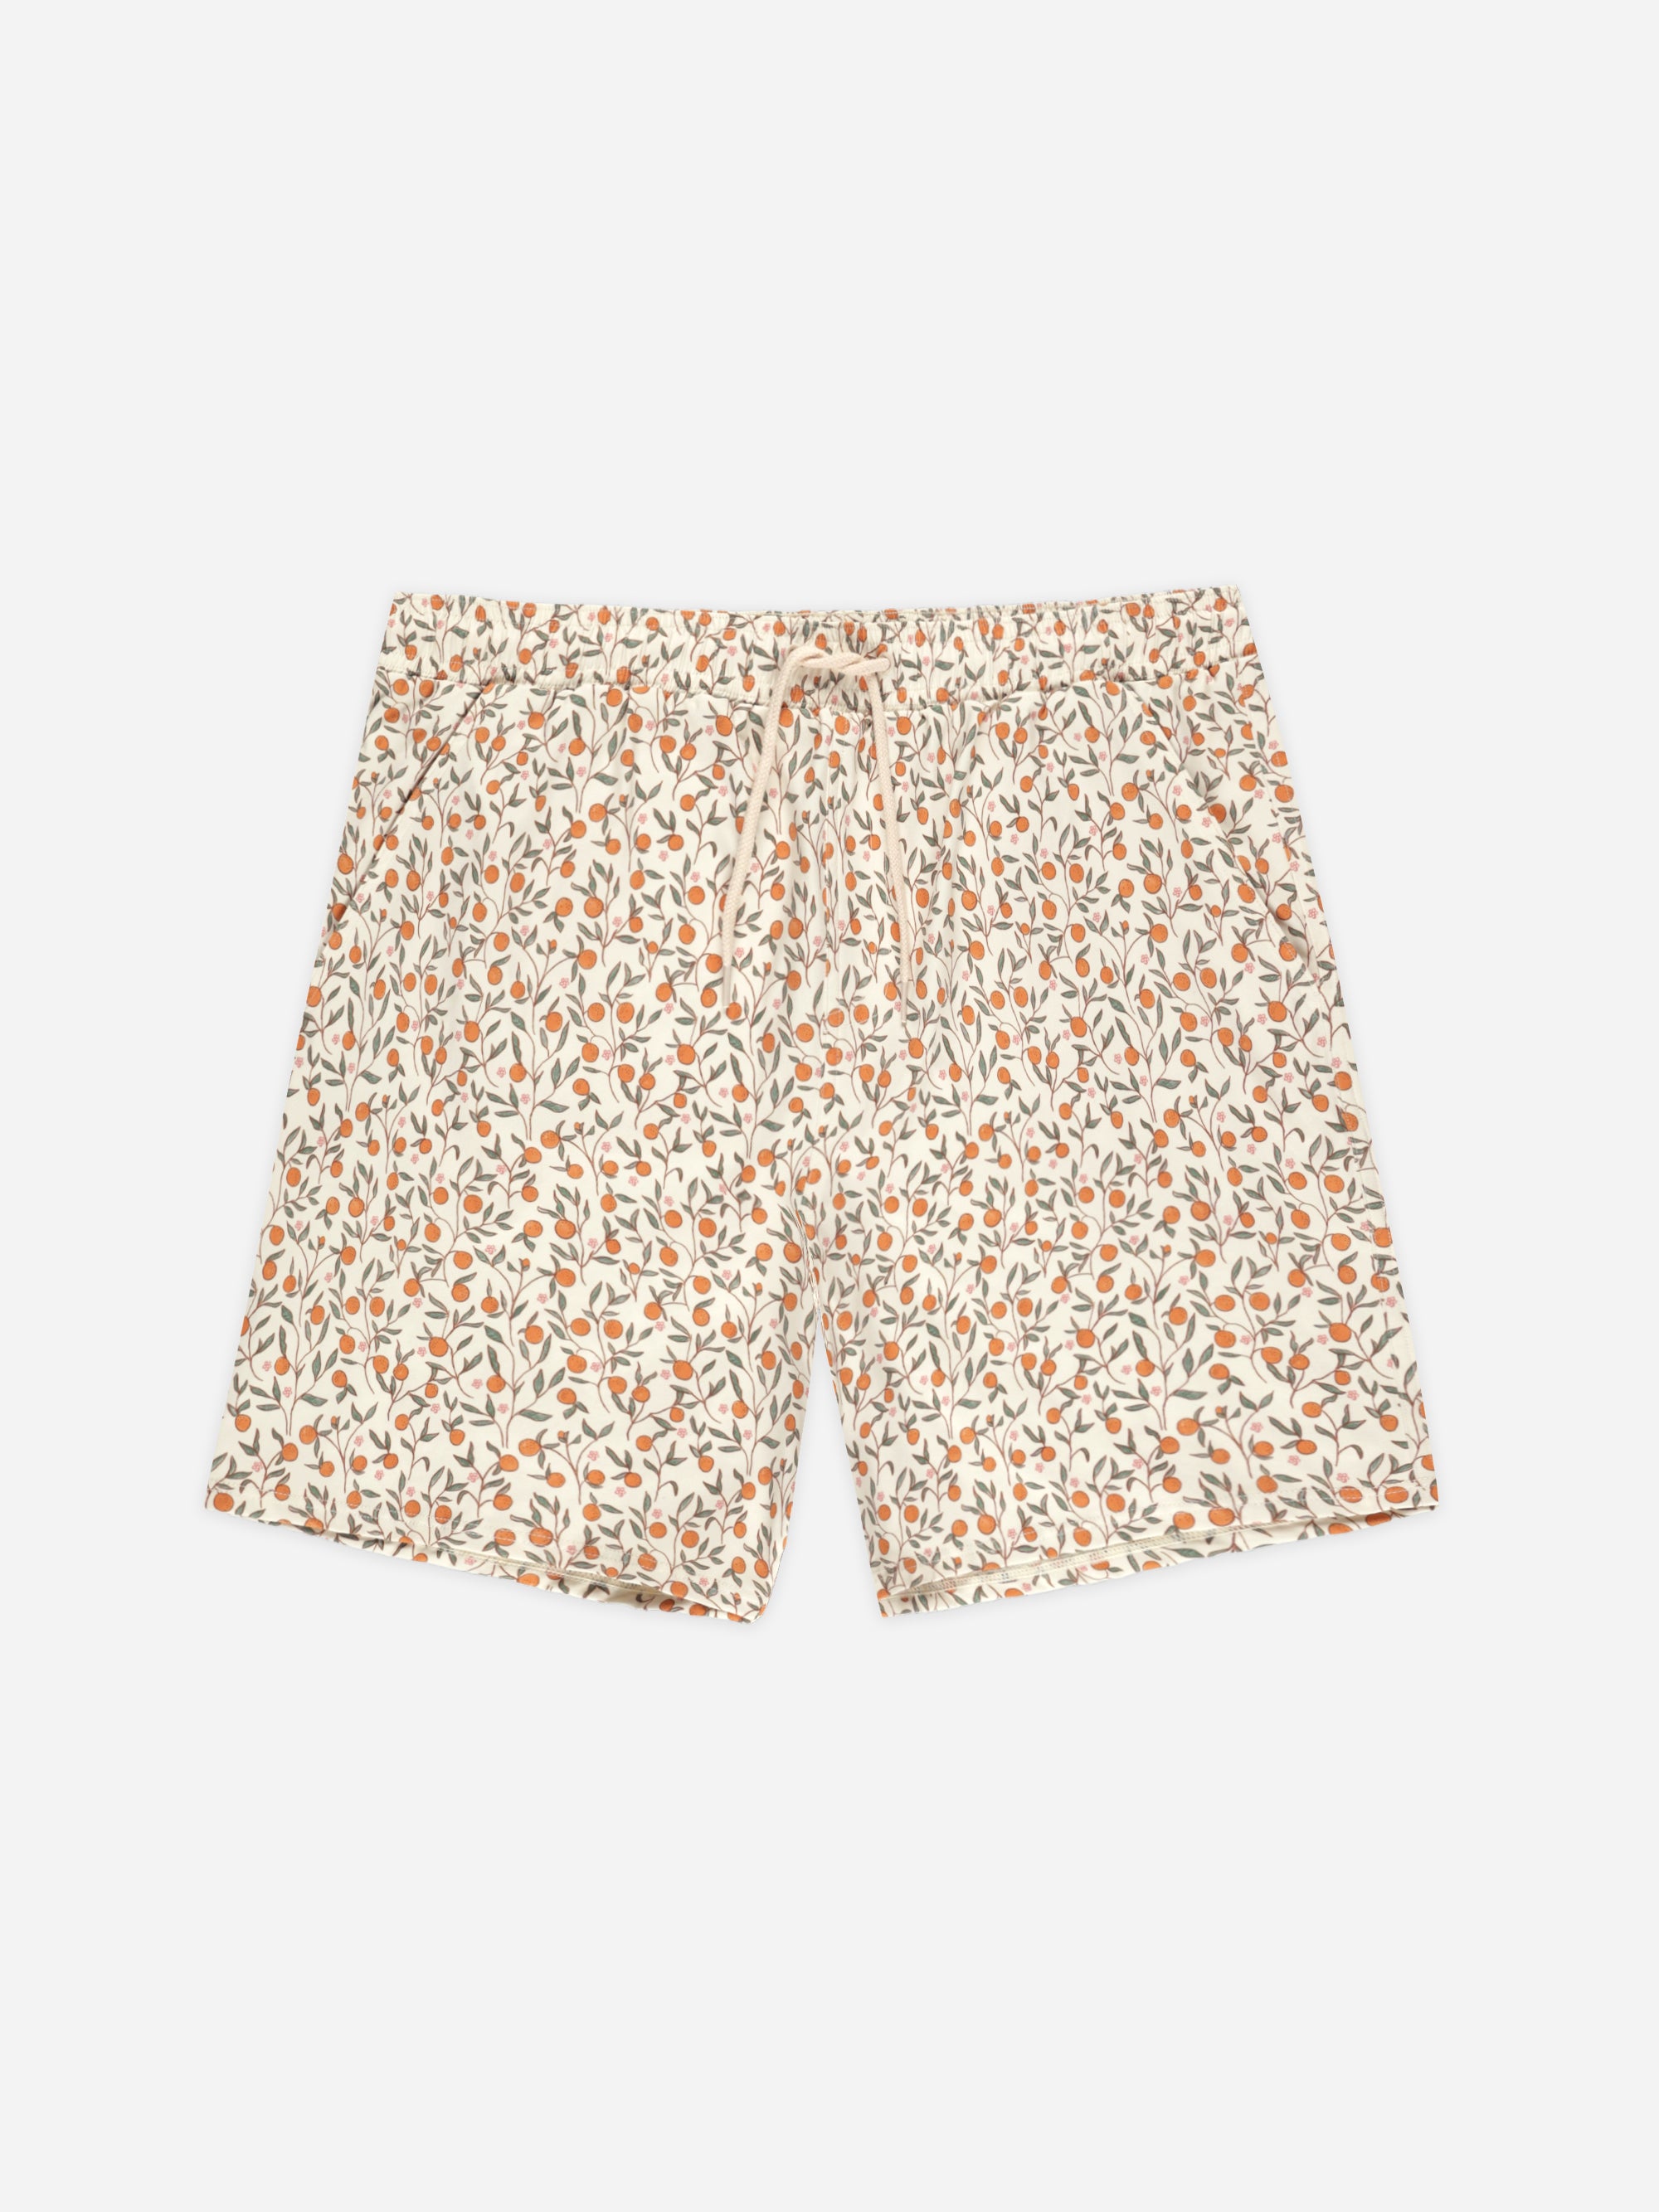 Boardshort | Citrus - Rylee + Cru | Kids Clothes | Trendy Baby Clothes | Modern Infant Outfits |